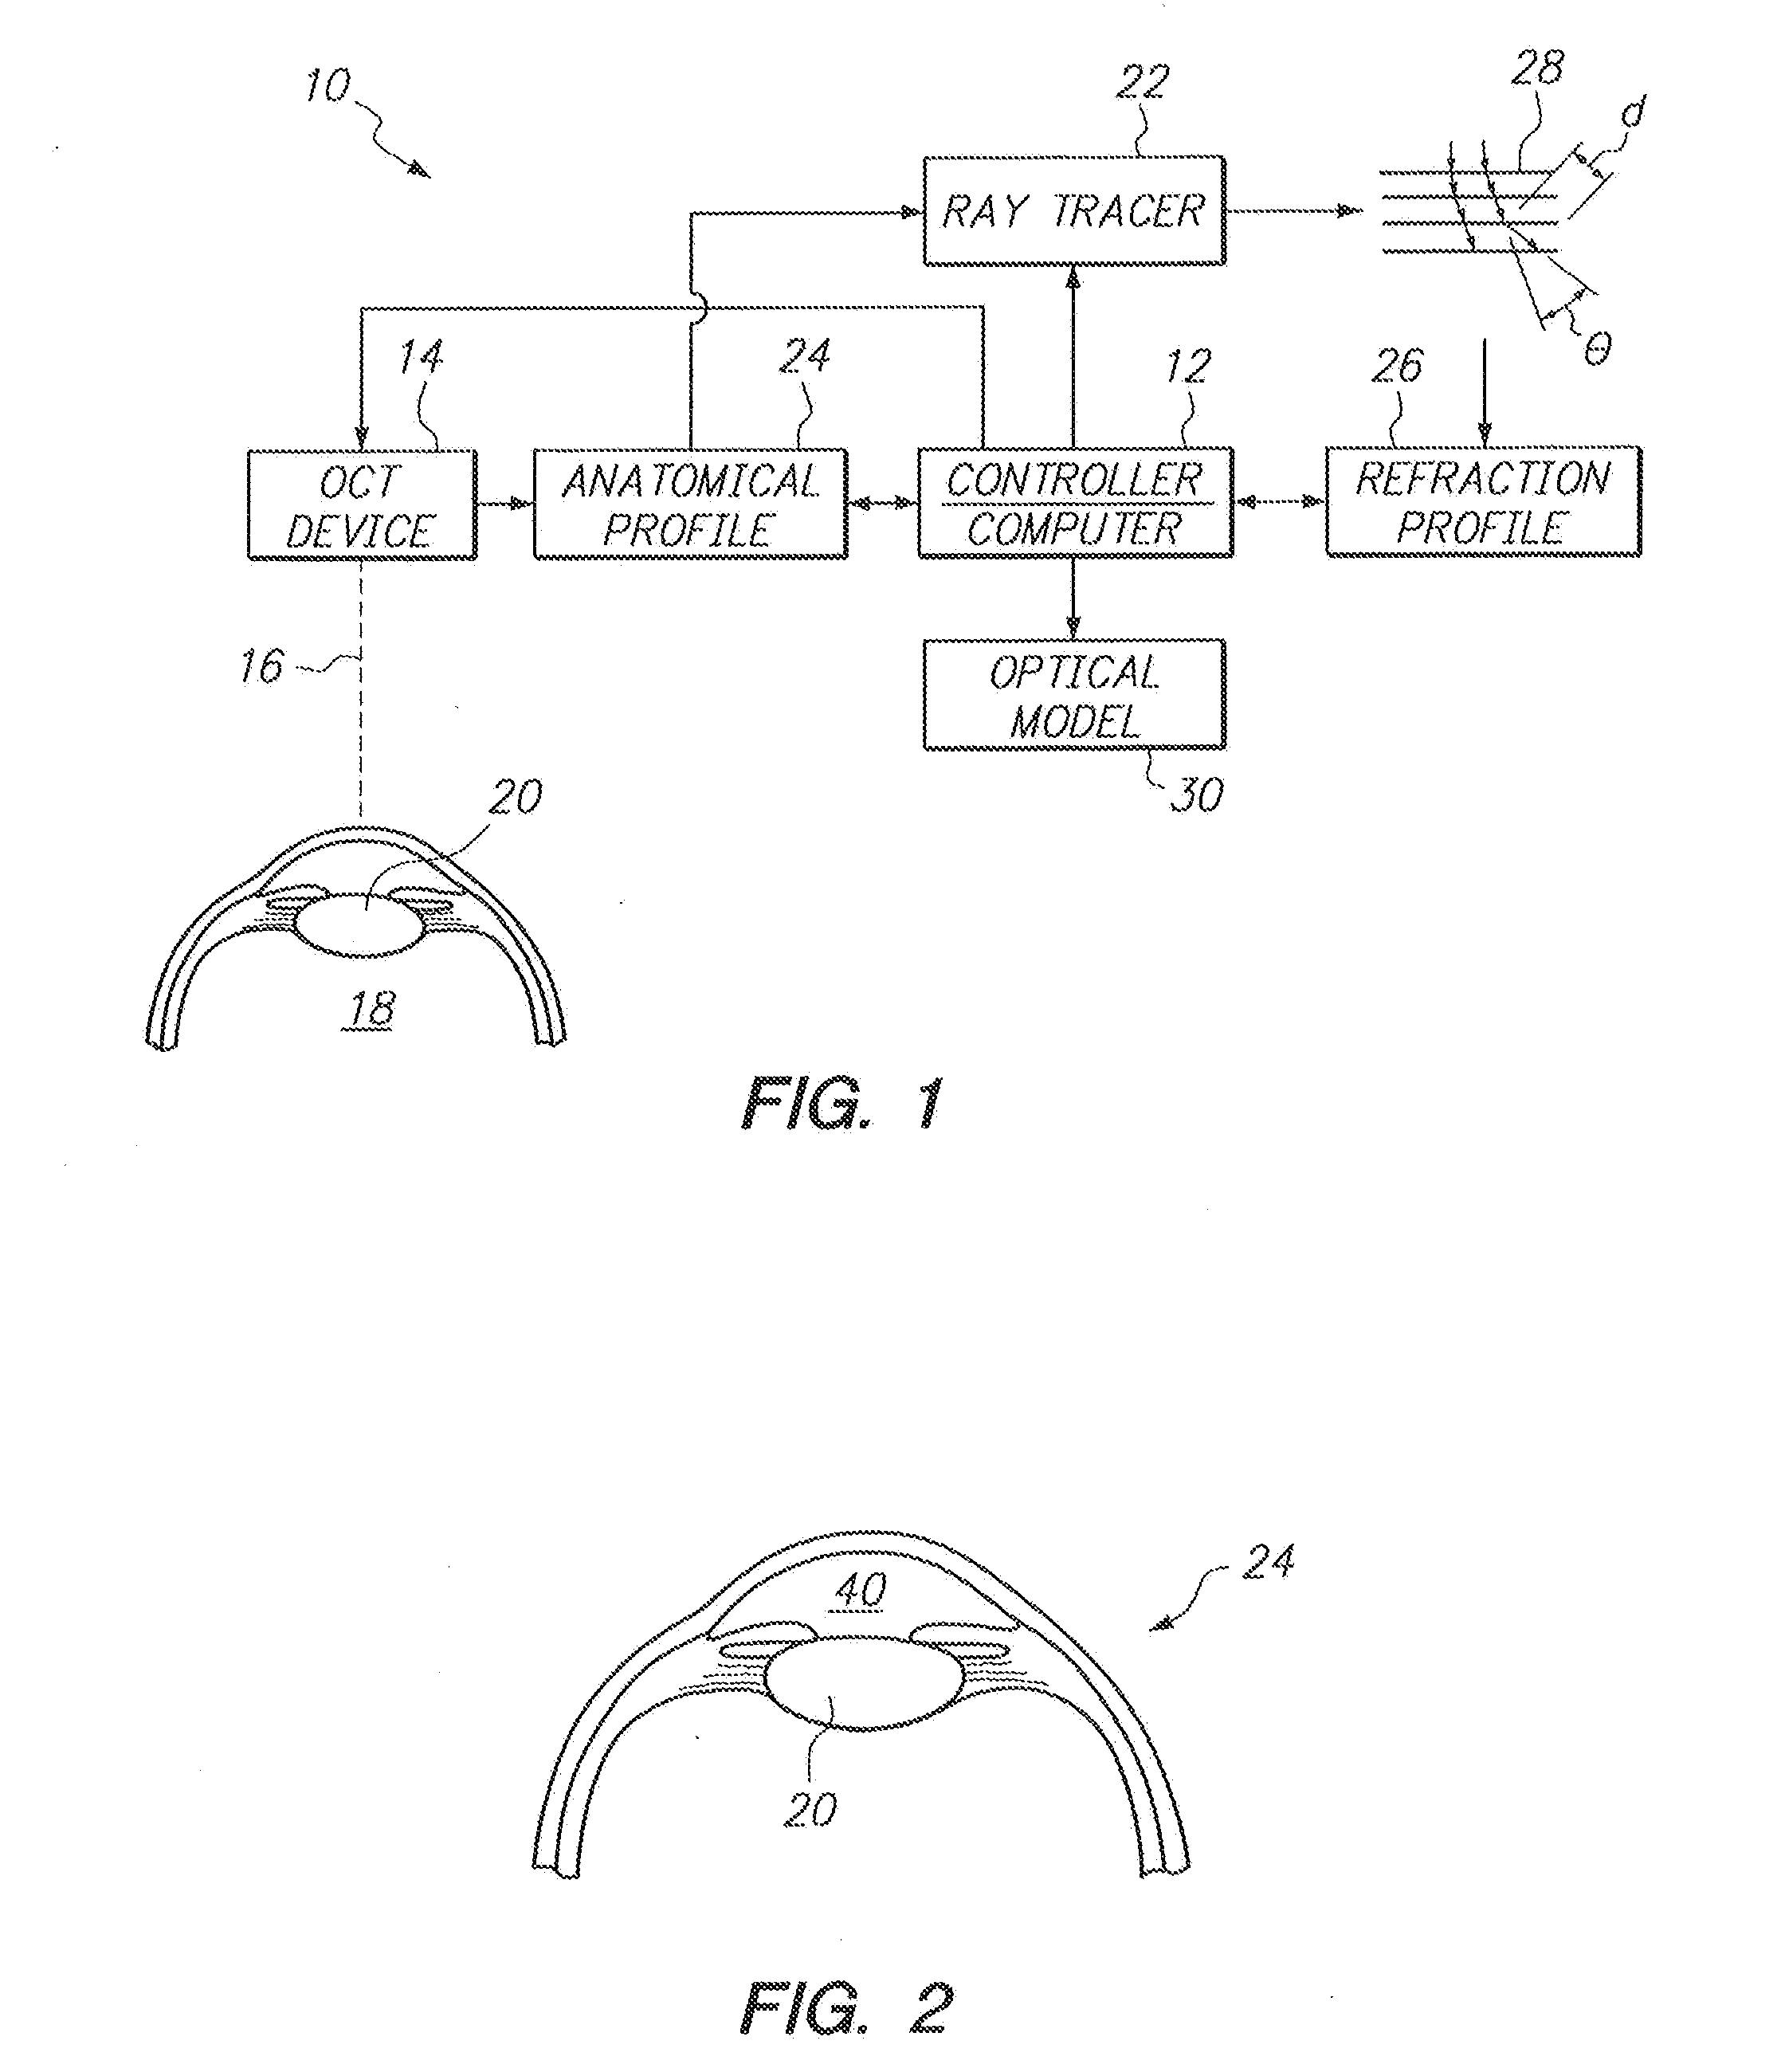 Method and System for Combining OCT and Ray Tracing to Create an Optical Model for Achieving a Predictive Outcome